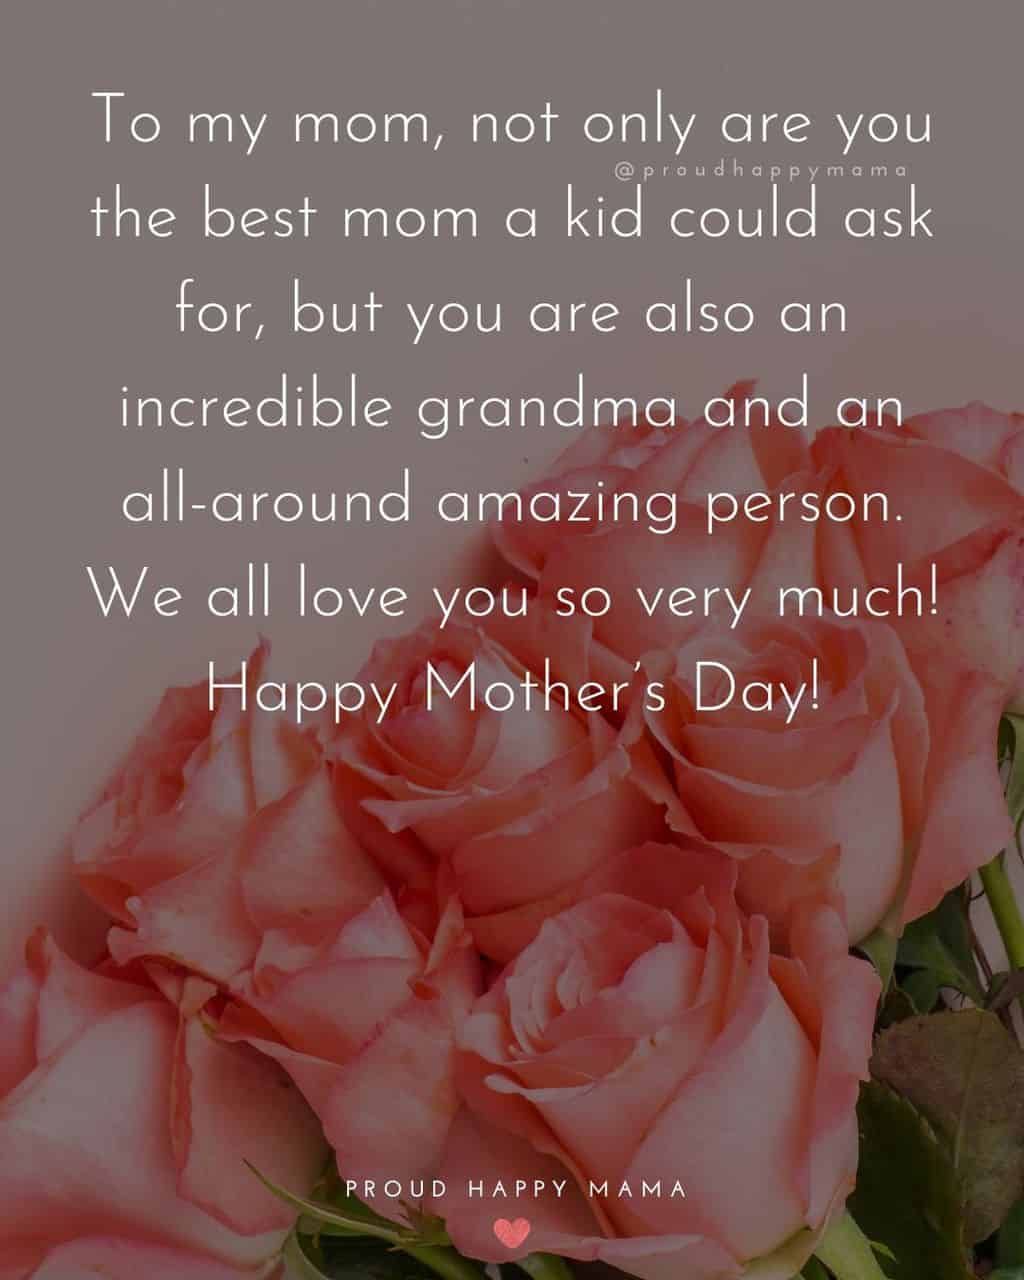 Happy Mothers Day Quotes To Grandma - To my mom, not only are you the best mom a kid could ask for, but you are also an